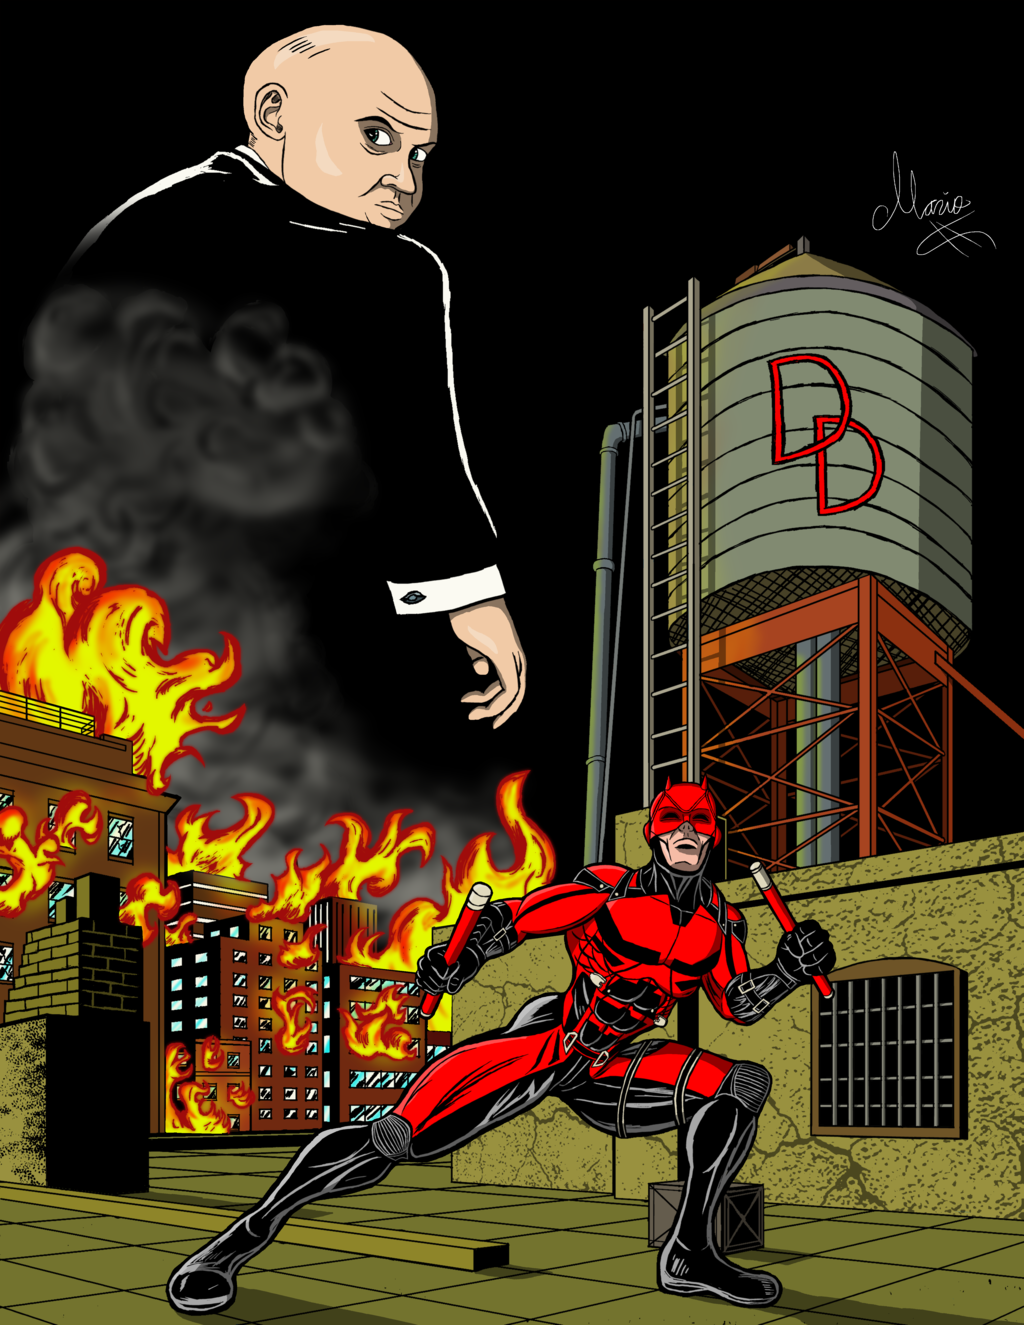 Netflix Daredevil Colored by eMokid64 on